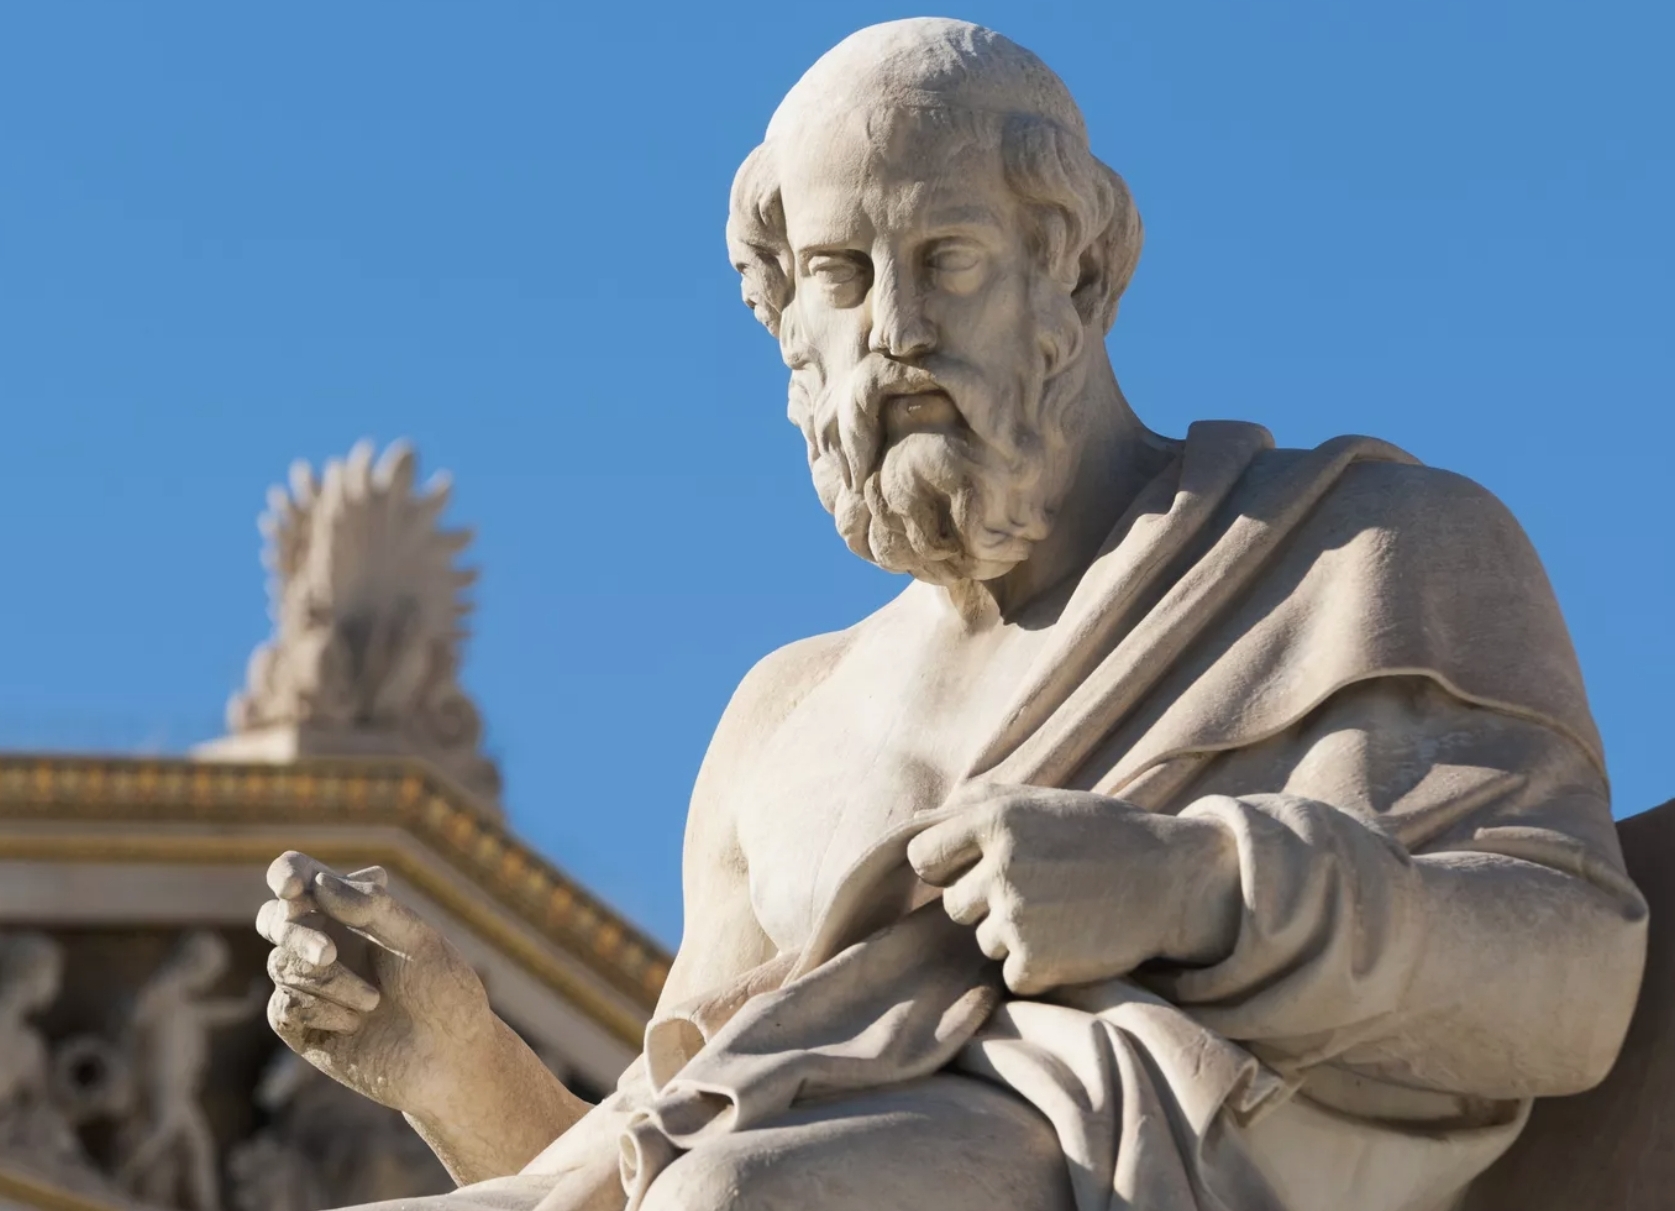 10 life lessons from Plato's 